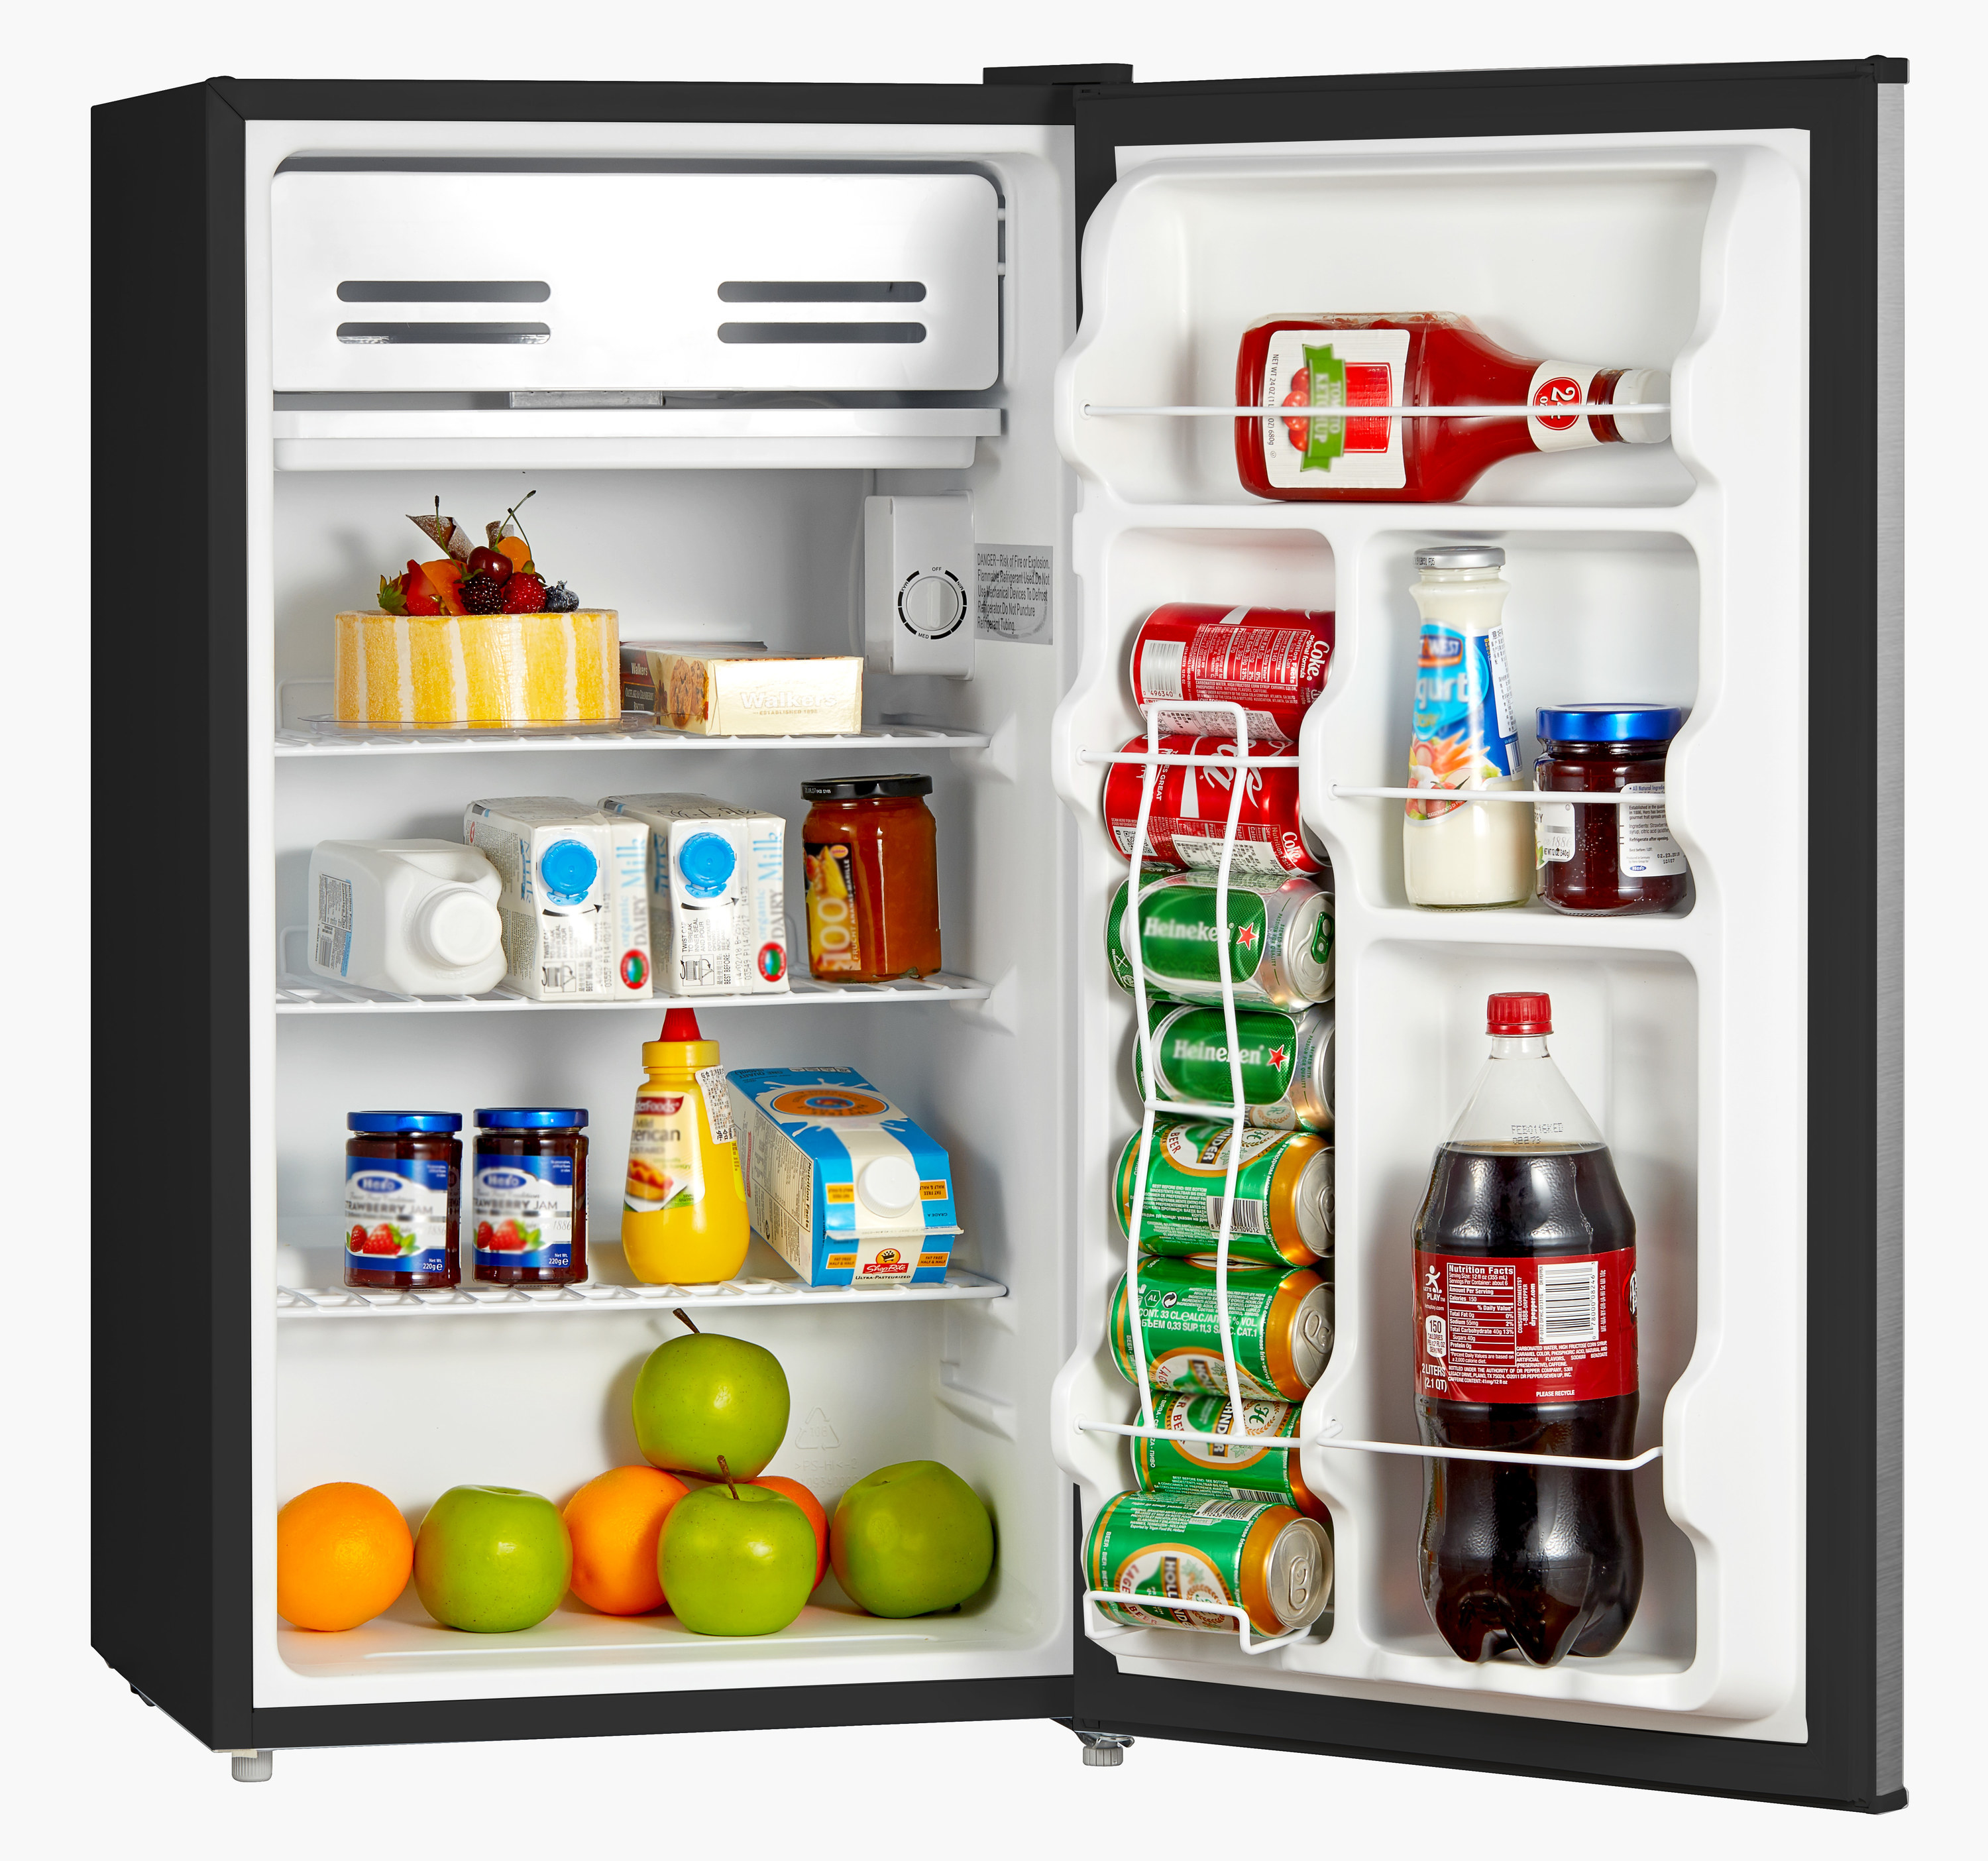 The interior of the mini fridge, featuring three shelves and bottle storage and can dispenser on the door